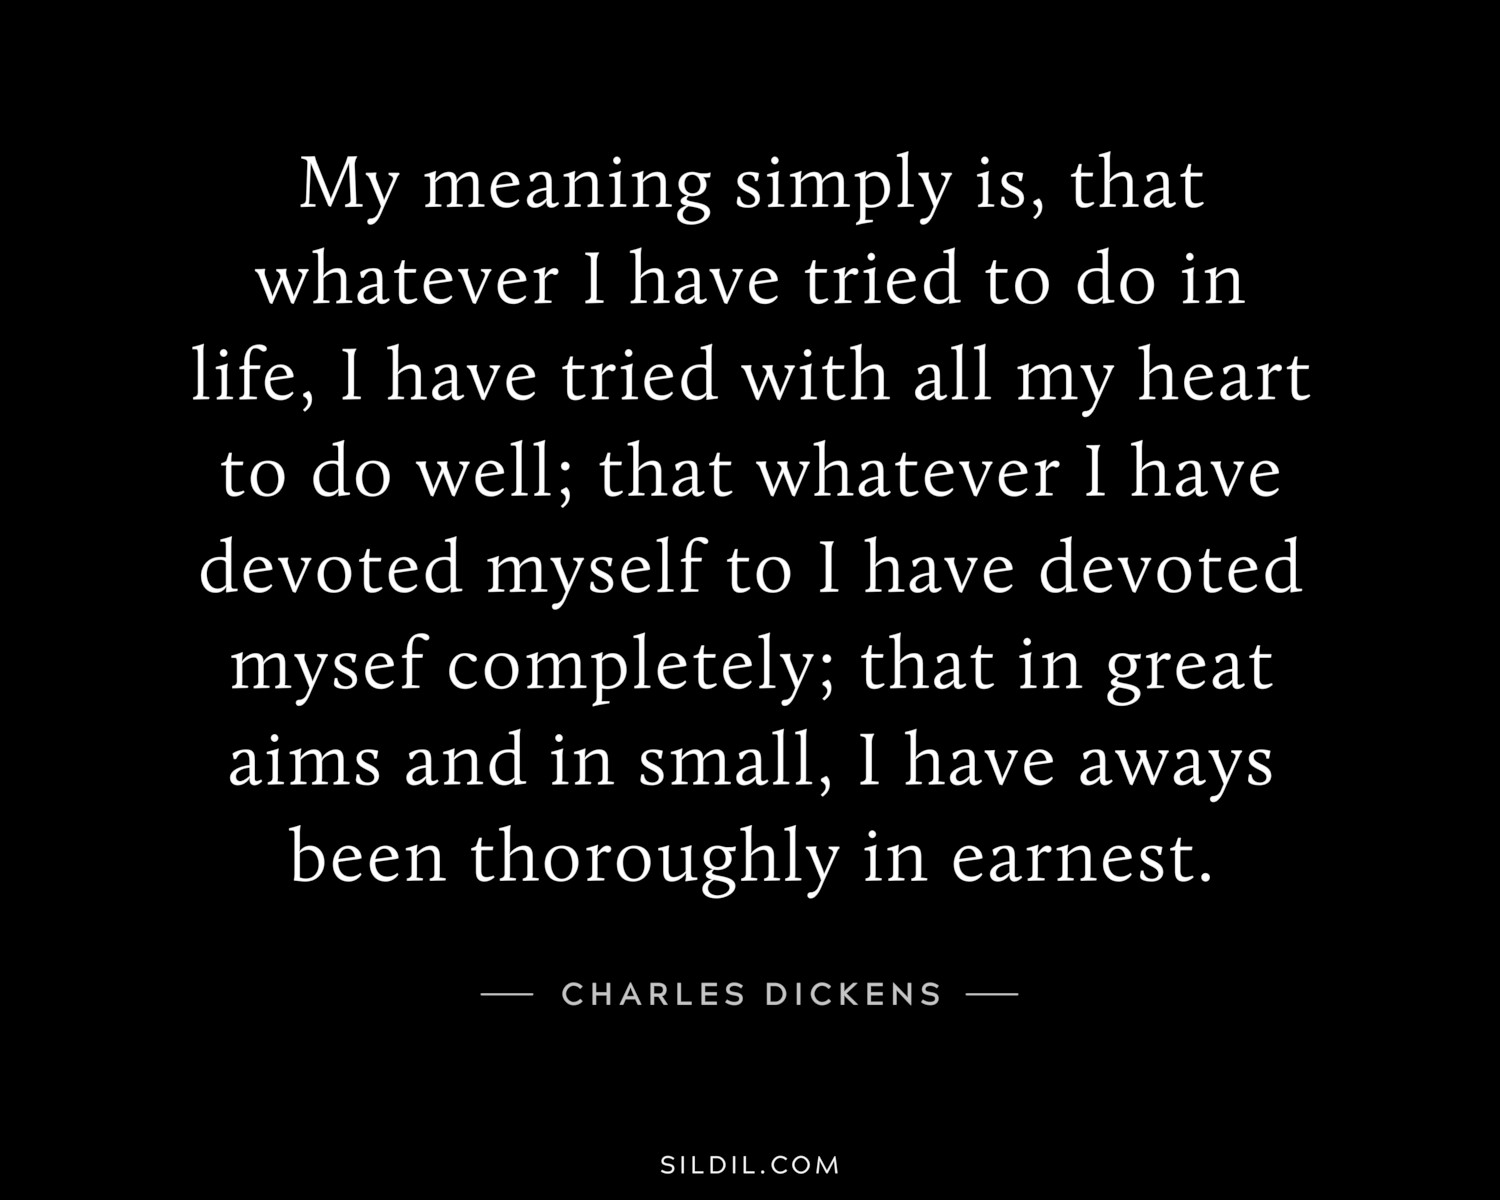 My meaning simply is, that whatever I have tried to do in life, I have tried with all my heart to do well; that whatever I have devoted myself to I have devoted mysef completely; that in great aims and in small, I have aways been thoroughly in earnest.